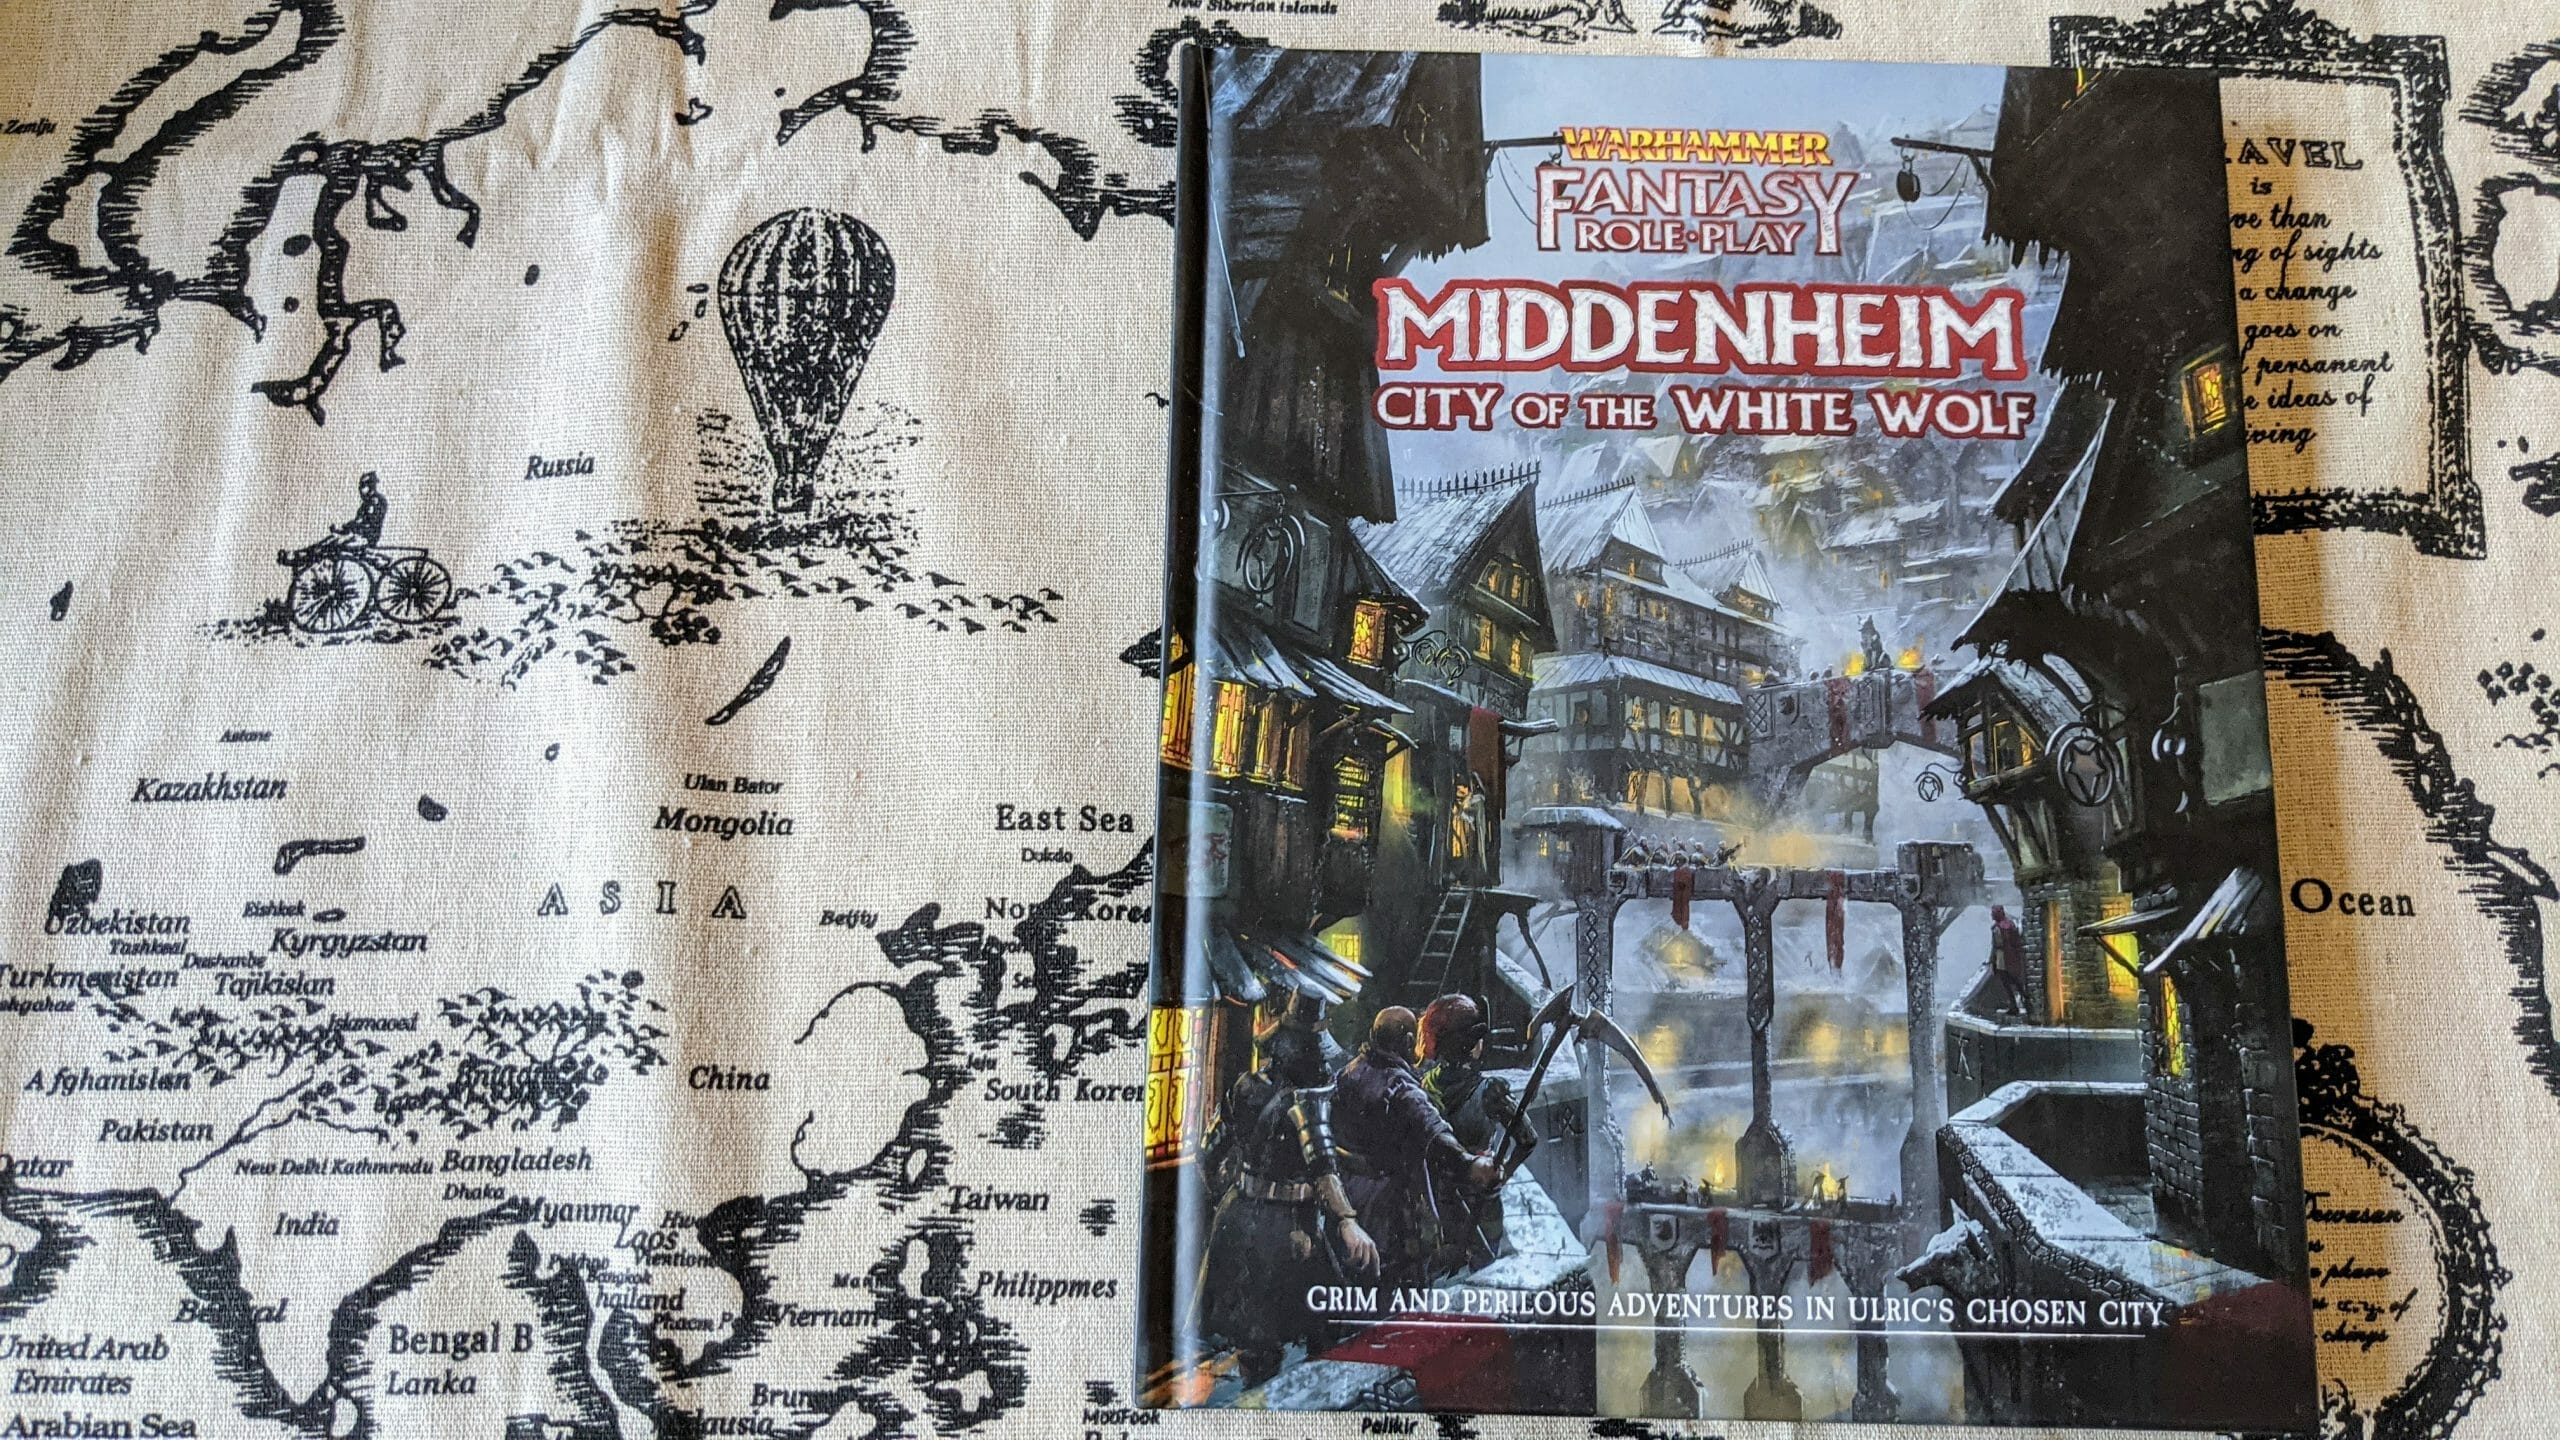 Fishhook grim: A review of Middenheim – City of the White Wolf for Warhammer 4e